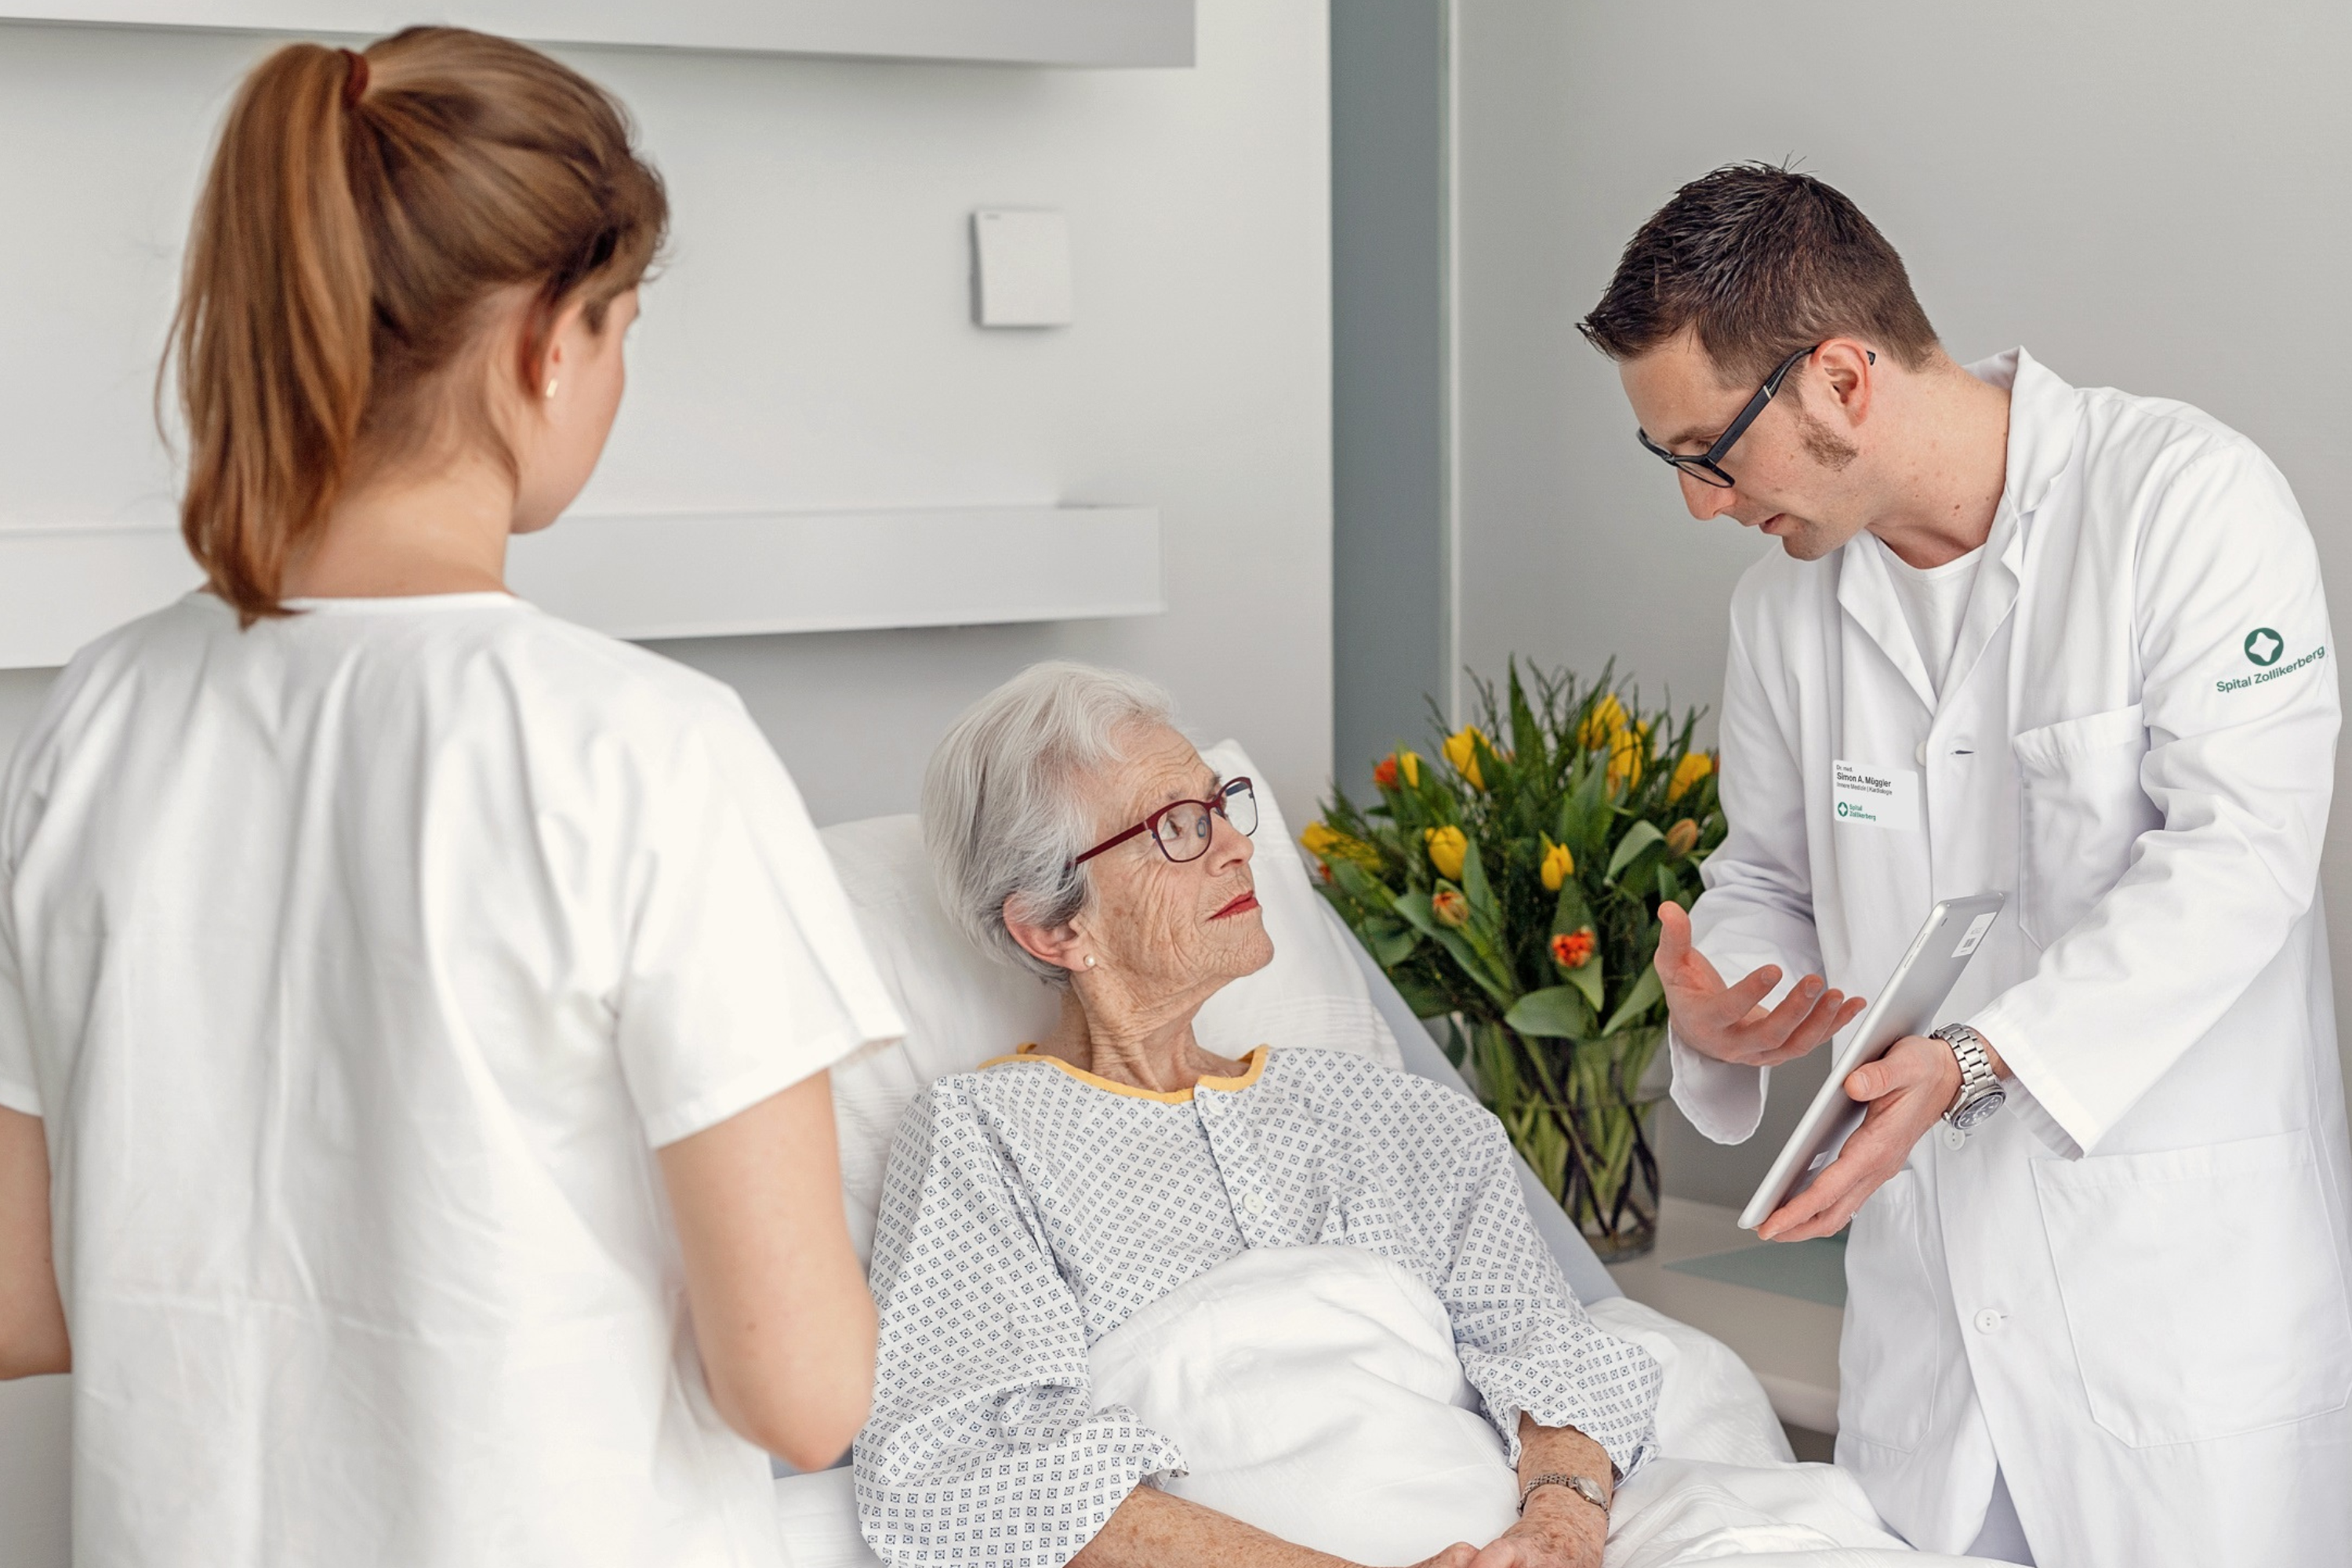 Elderly patient talking to a doctor and nurse in a hospital room.